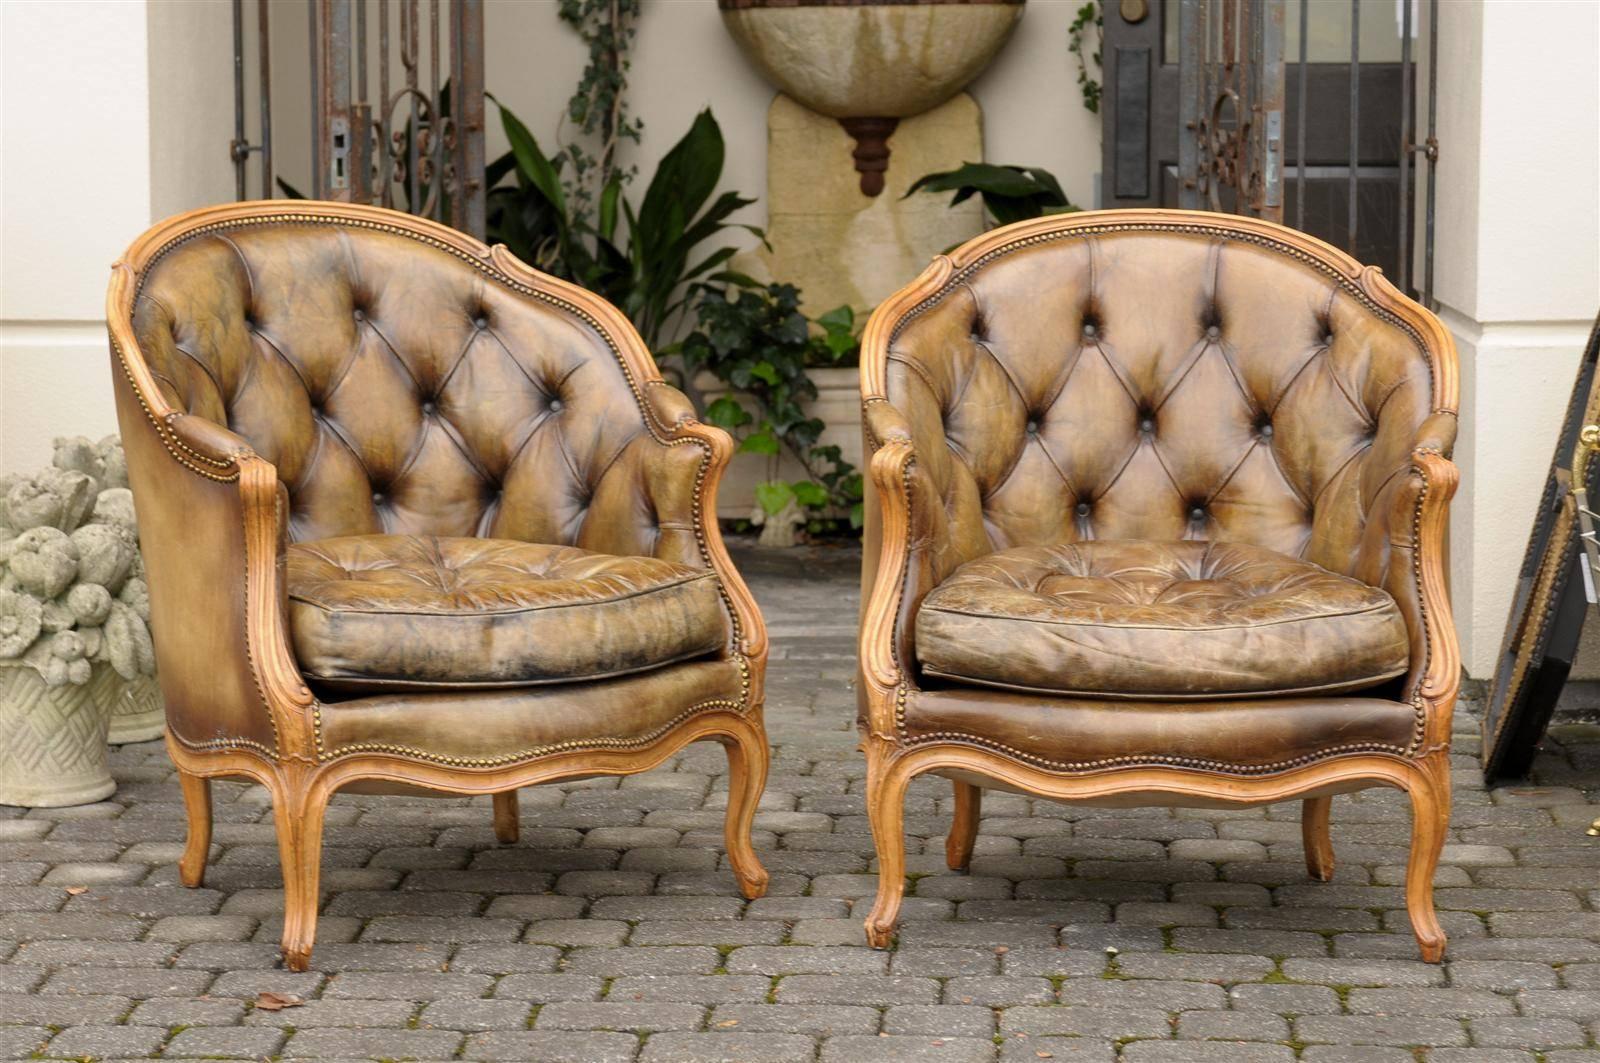 This pair of French Louis XV style bergeres features lovely colored leather upholstery, tufted in the back with nailhead trim. The wraparound backs, as well as the seat cushions, offer great comfort to the sitter. The curviness, typical of the Louis